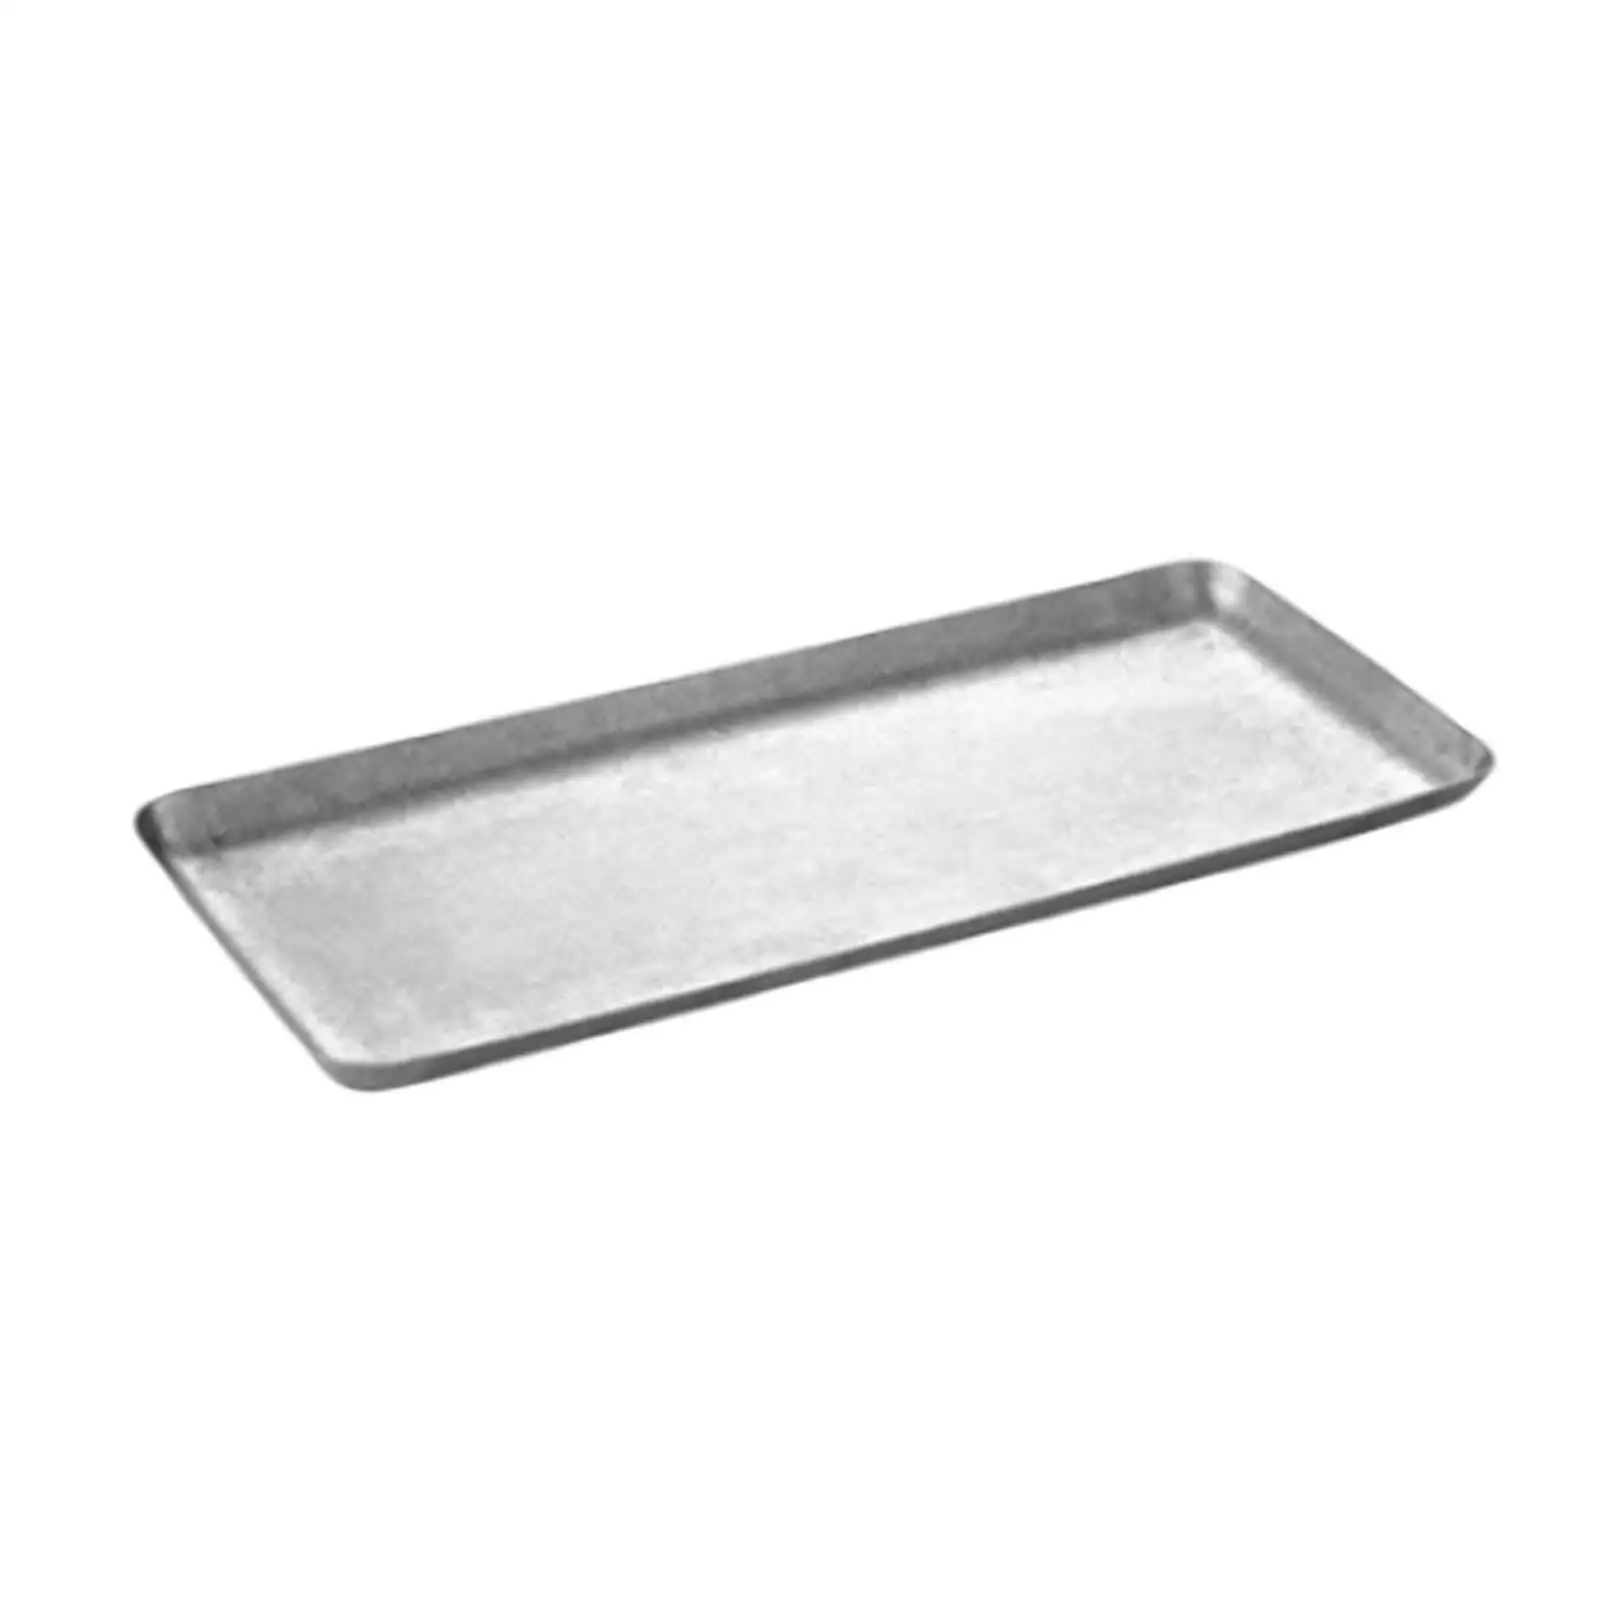 Stainless Steel Serving Tray Modern Decorative Flat Tray Metal Tray Serving Dish for Living Room Bedroom Hotel Party Desk